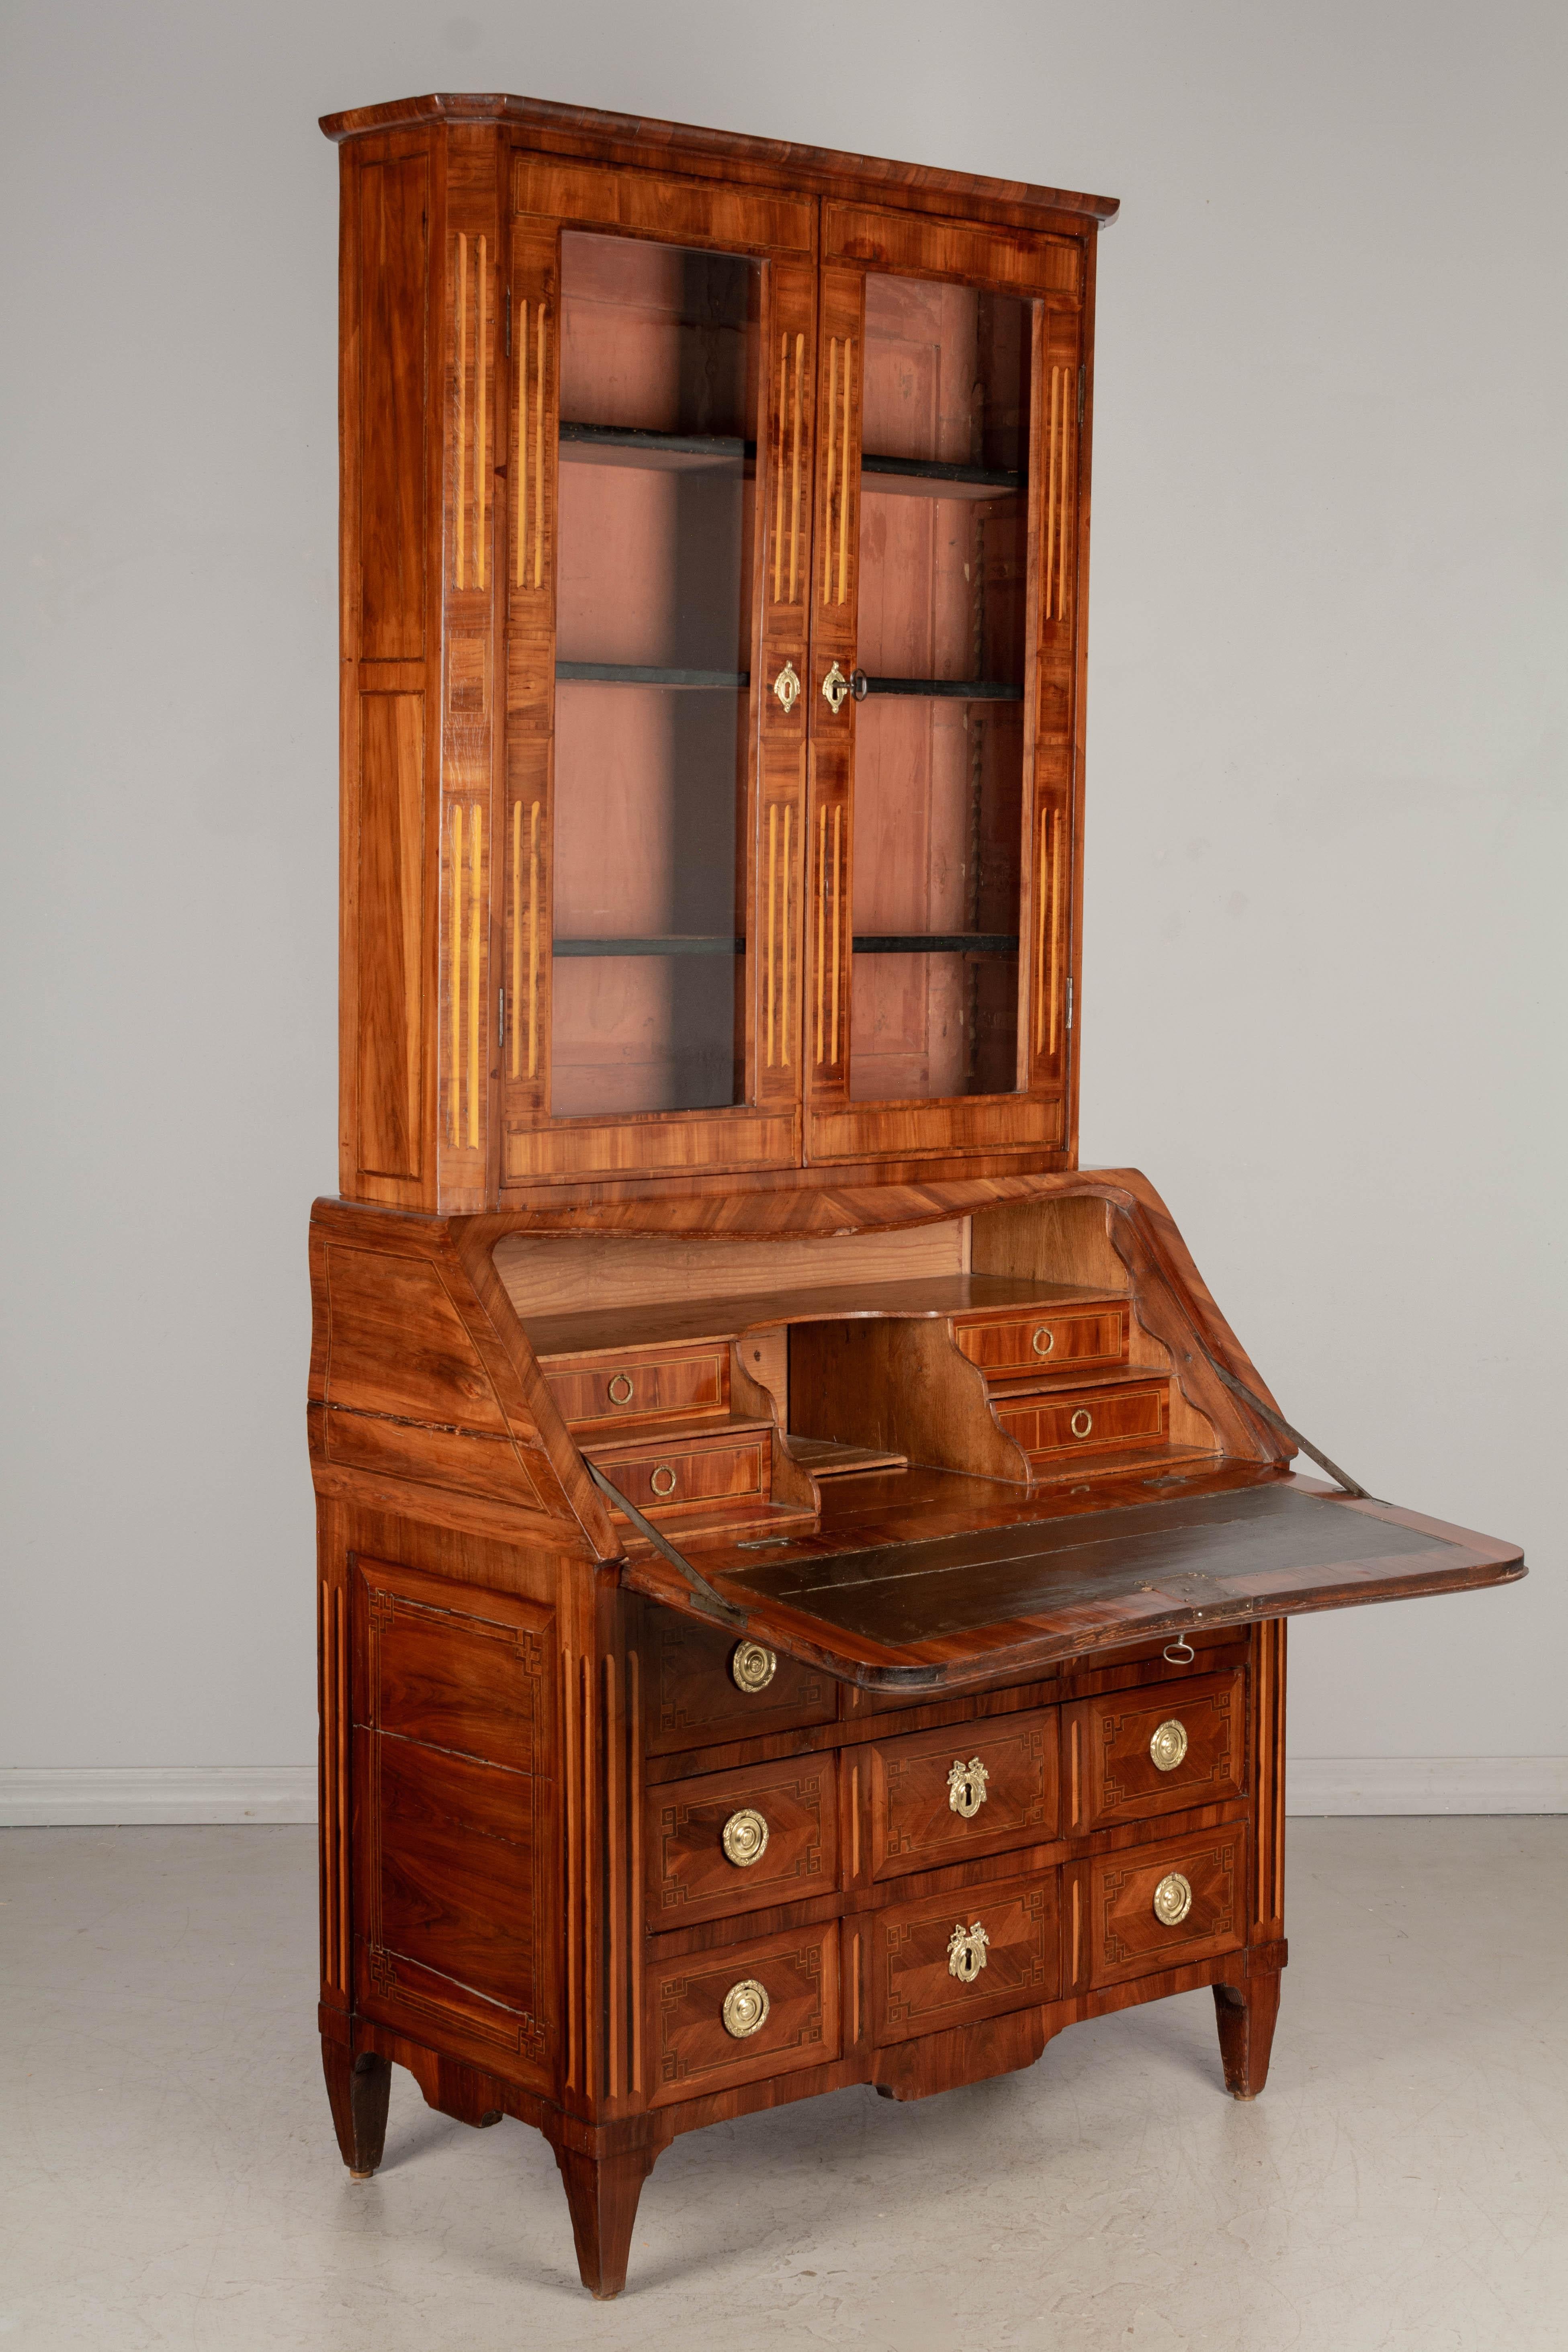 Cast 18th Century French Louis XVI Marquetry Secretaire or Desk For Sale